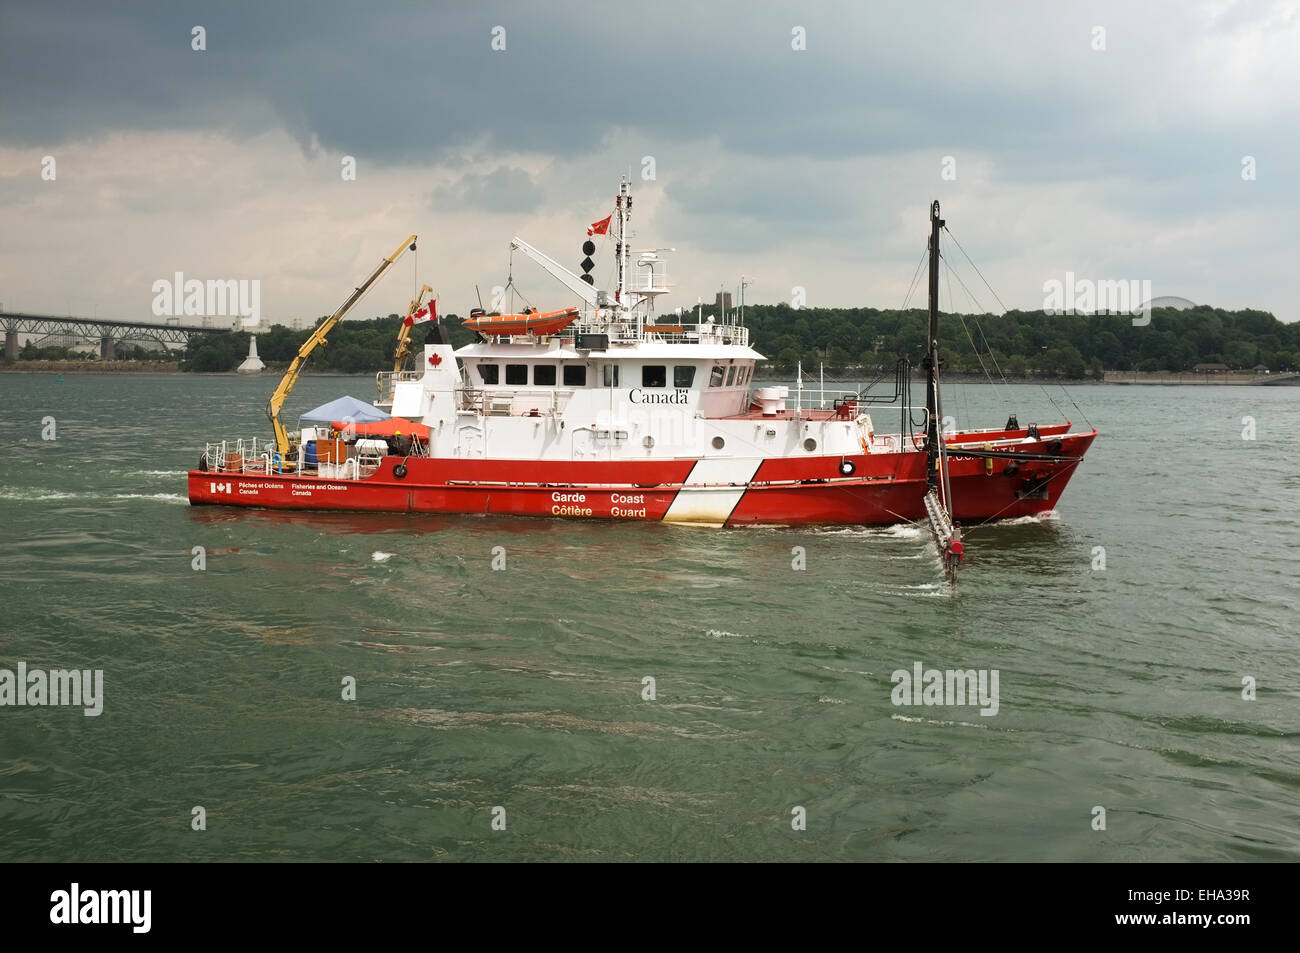 Canadian Coast Guard ship in the St Lawrence, Montreal, Quebec. Stock Photo